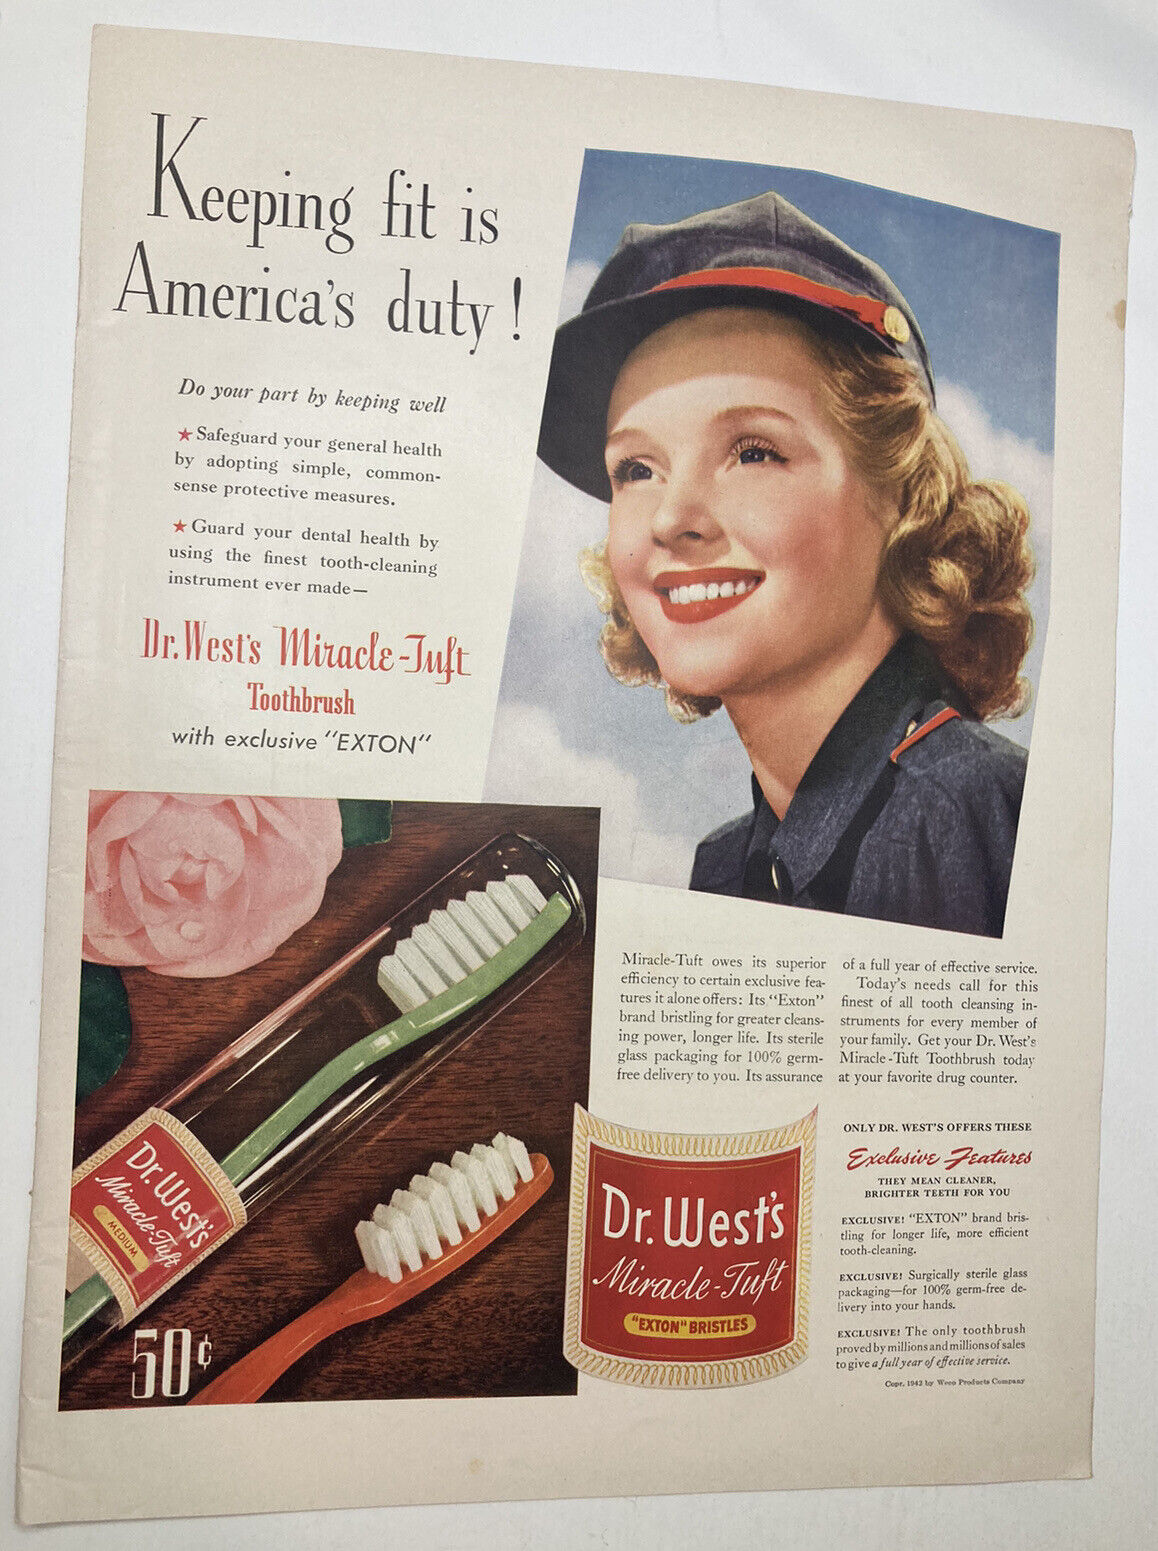 c1942 Dr. West's Miracle-Tuft Toothbrush, Keeping Fit Is America's Duty Print Ad